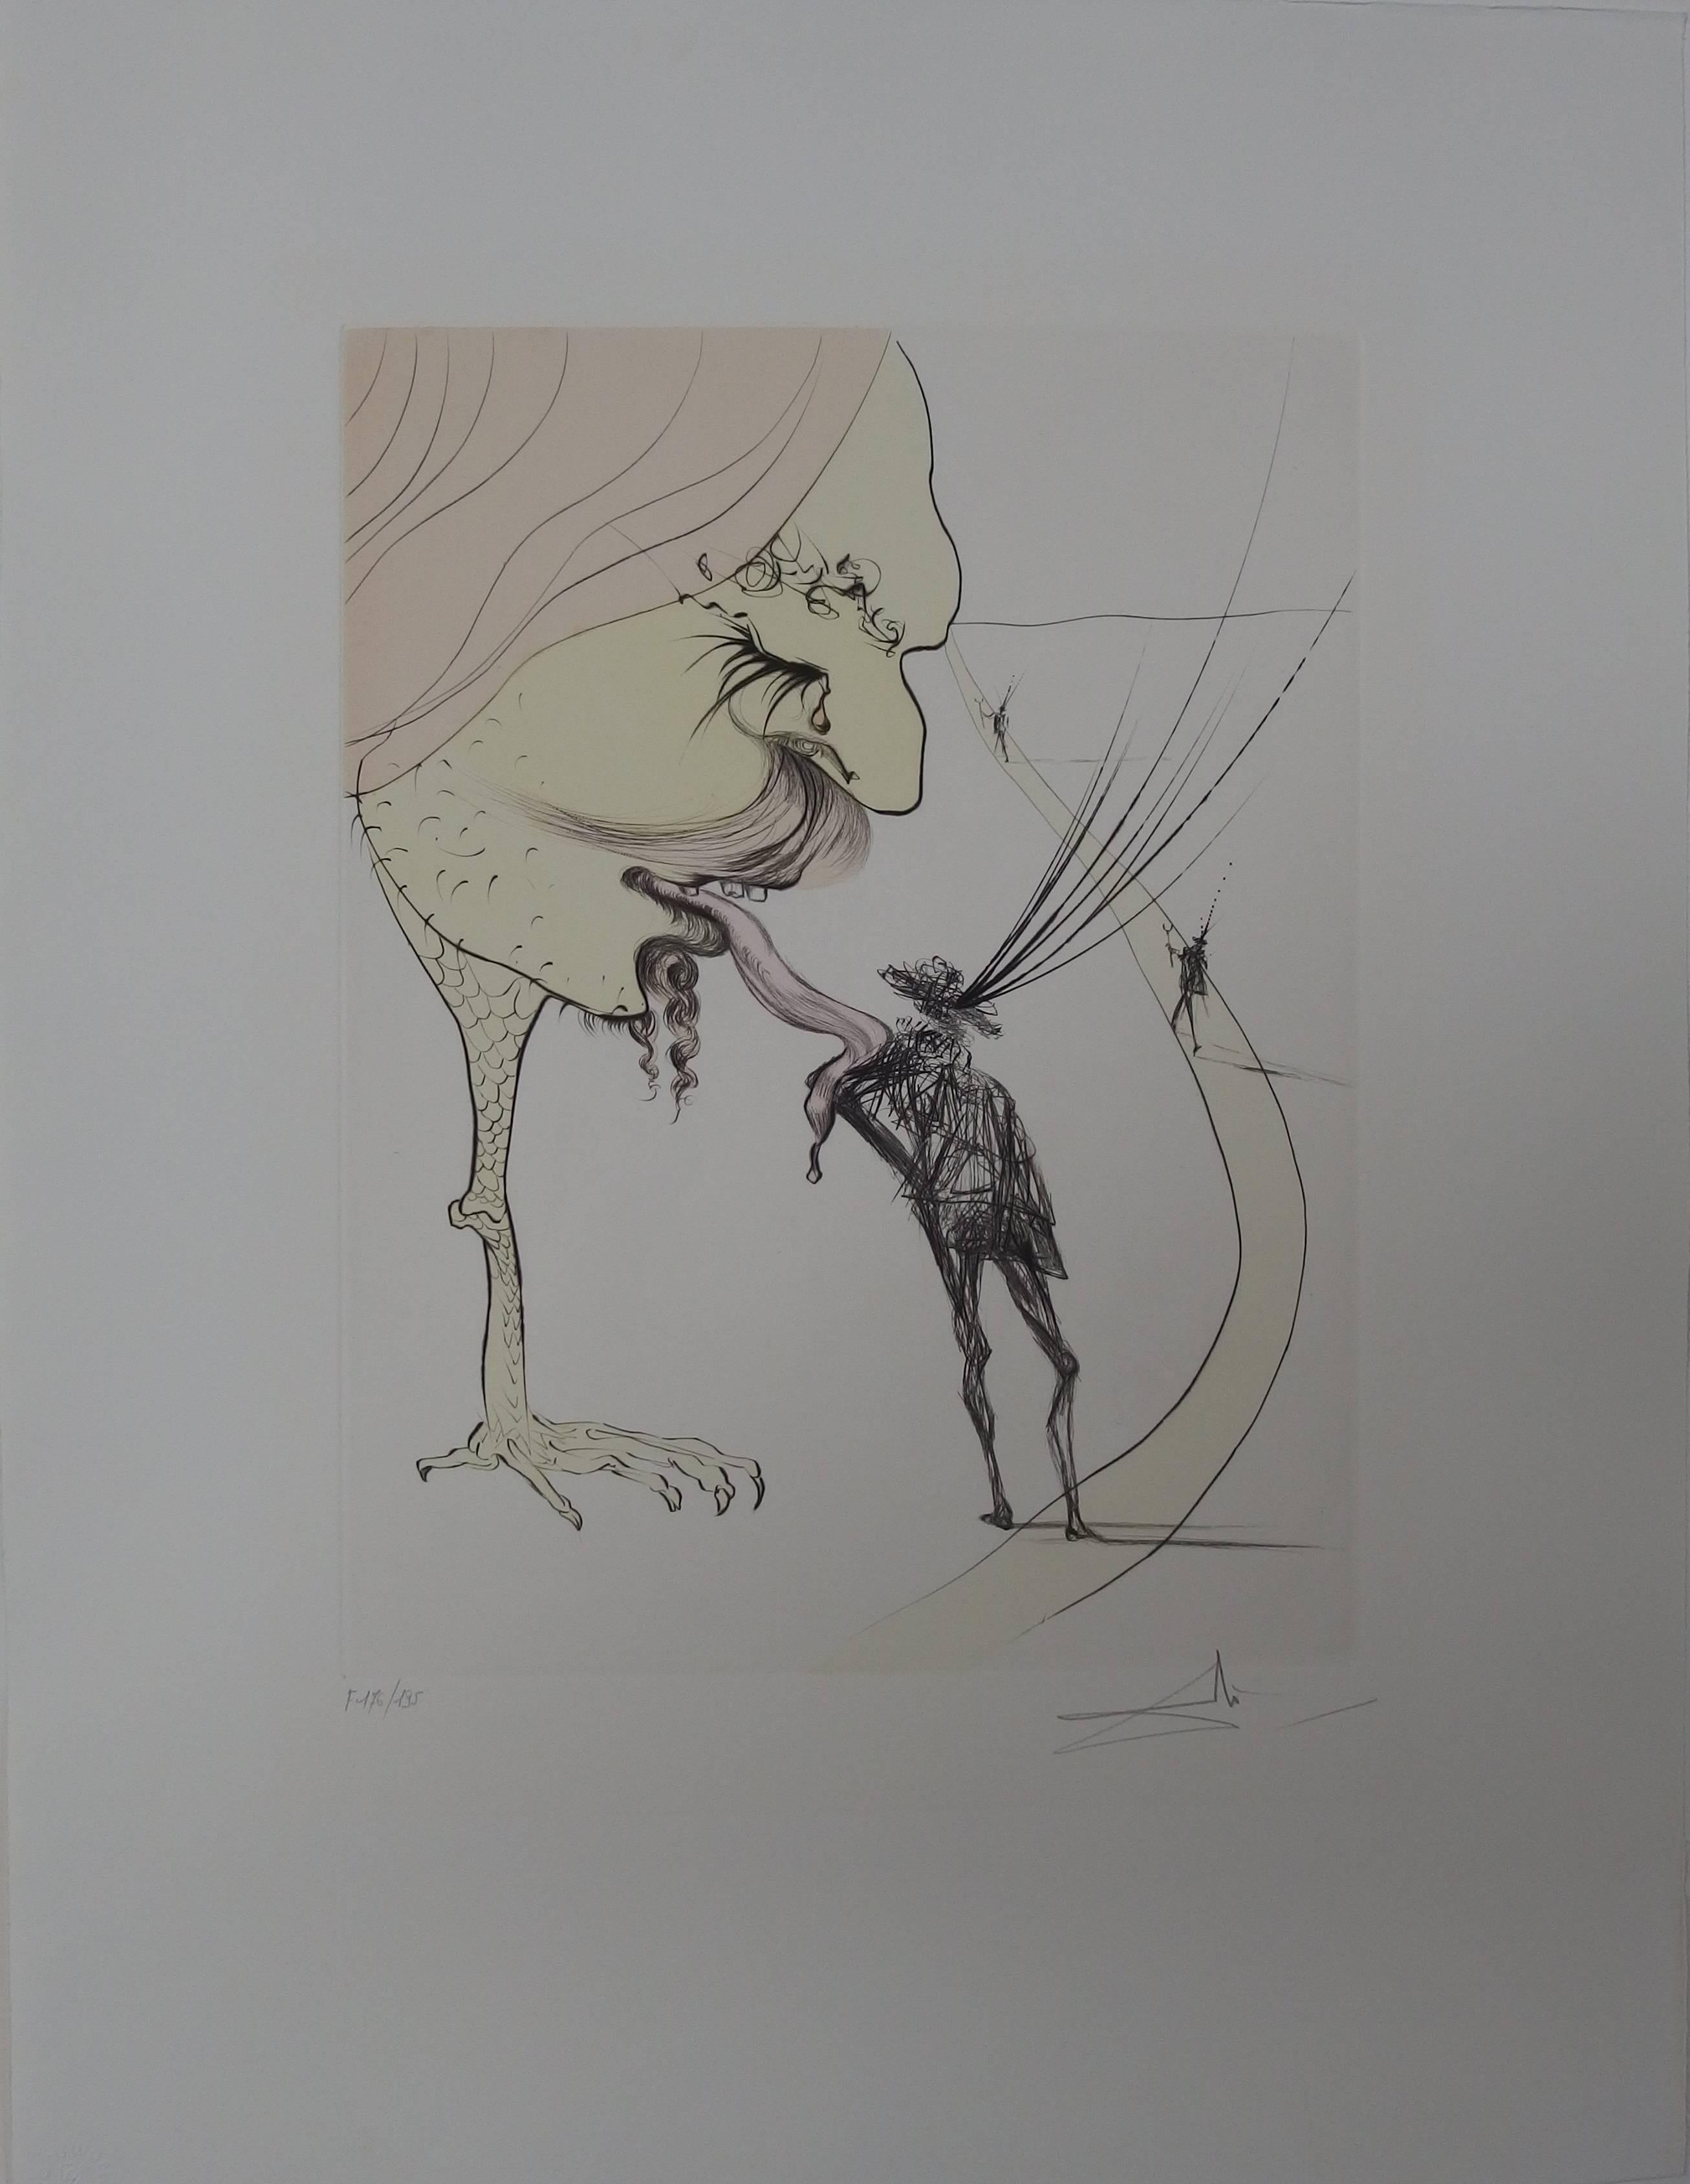 Salvador Dalí Figurative Print - Picasso : A Ticket for Glory - orignal etching - signed - 1974